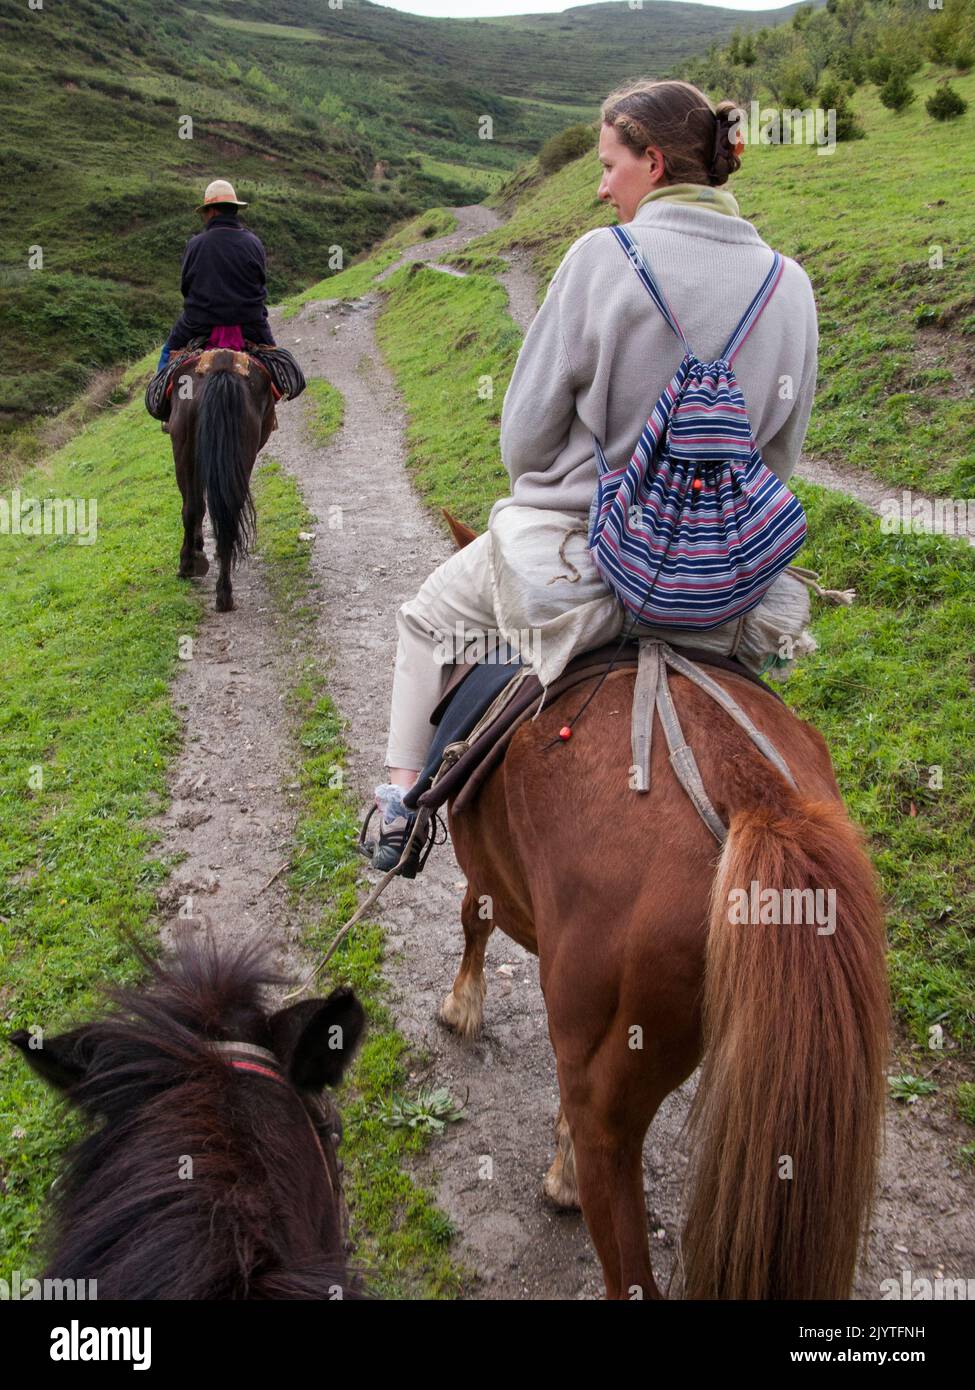 Horse trekking pony ride for Western and European holidaymaker, tourists and visitors given by Tibetan horseman / man / ethnic people of Tibet, resident or local to the walled ancient Chinese town of Songpan in northern Sichuan province, China. (126) Stock Photo